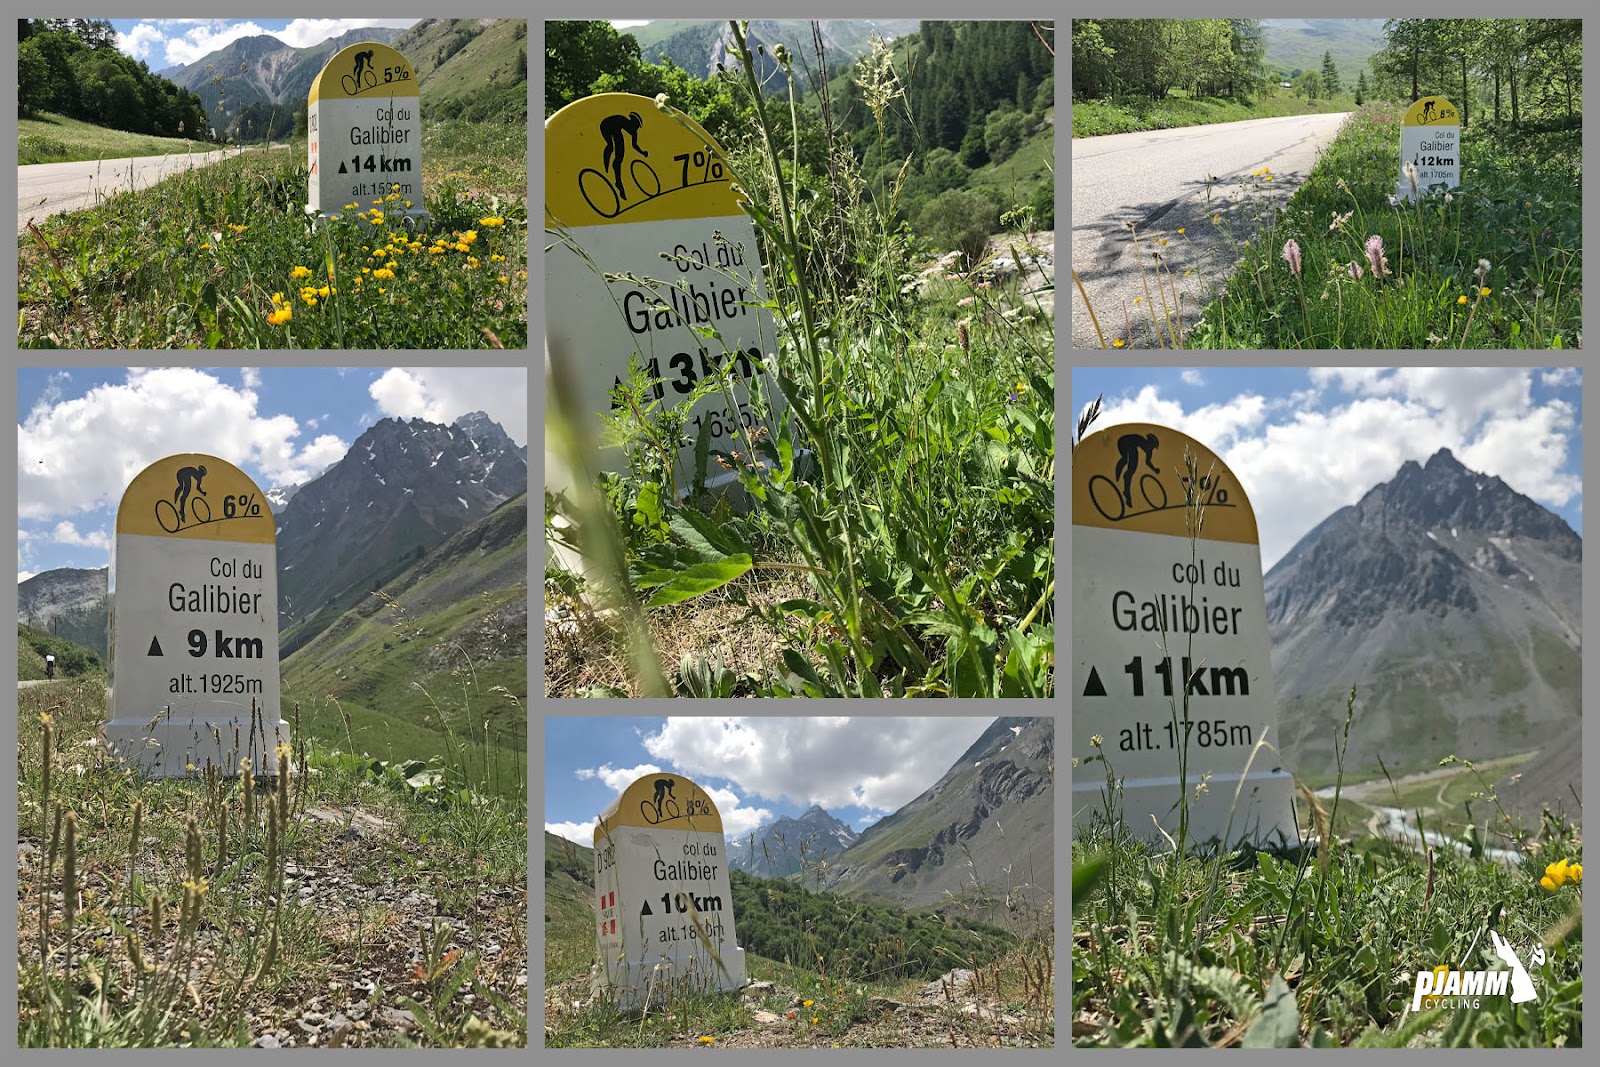 Cycling Col du Galibier from Valloire: photo collage shows various yellow and white KM markers throughout the climb